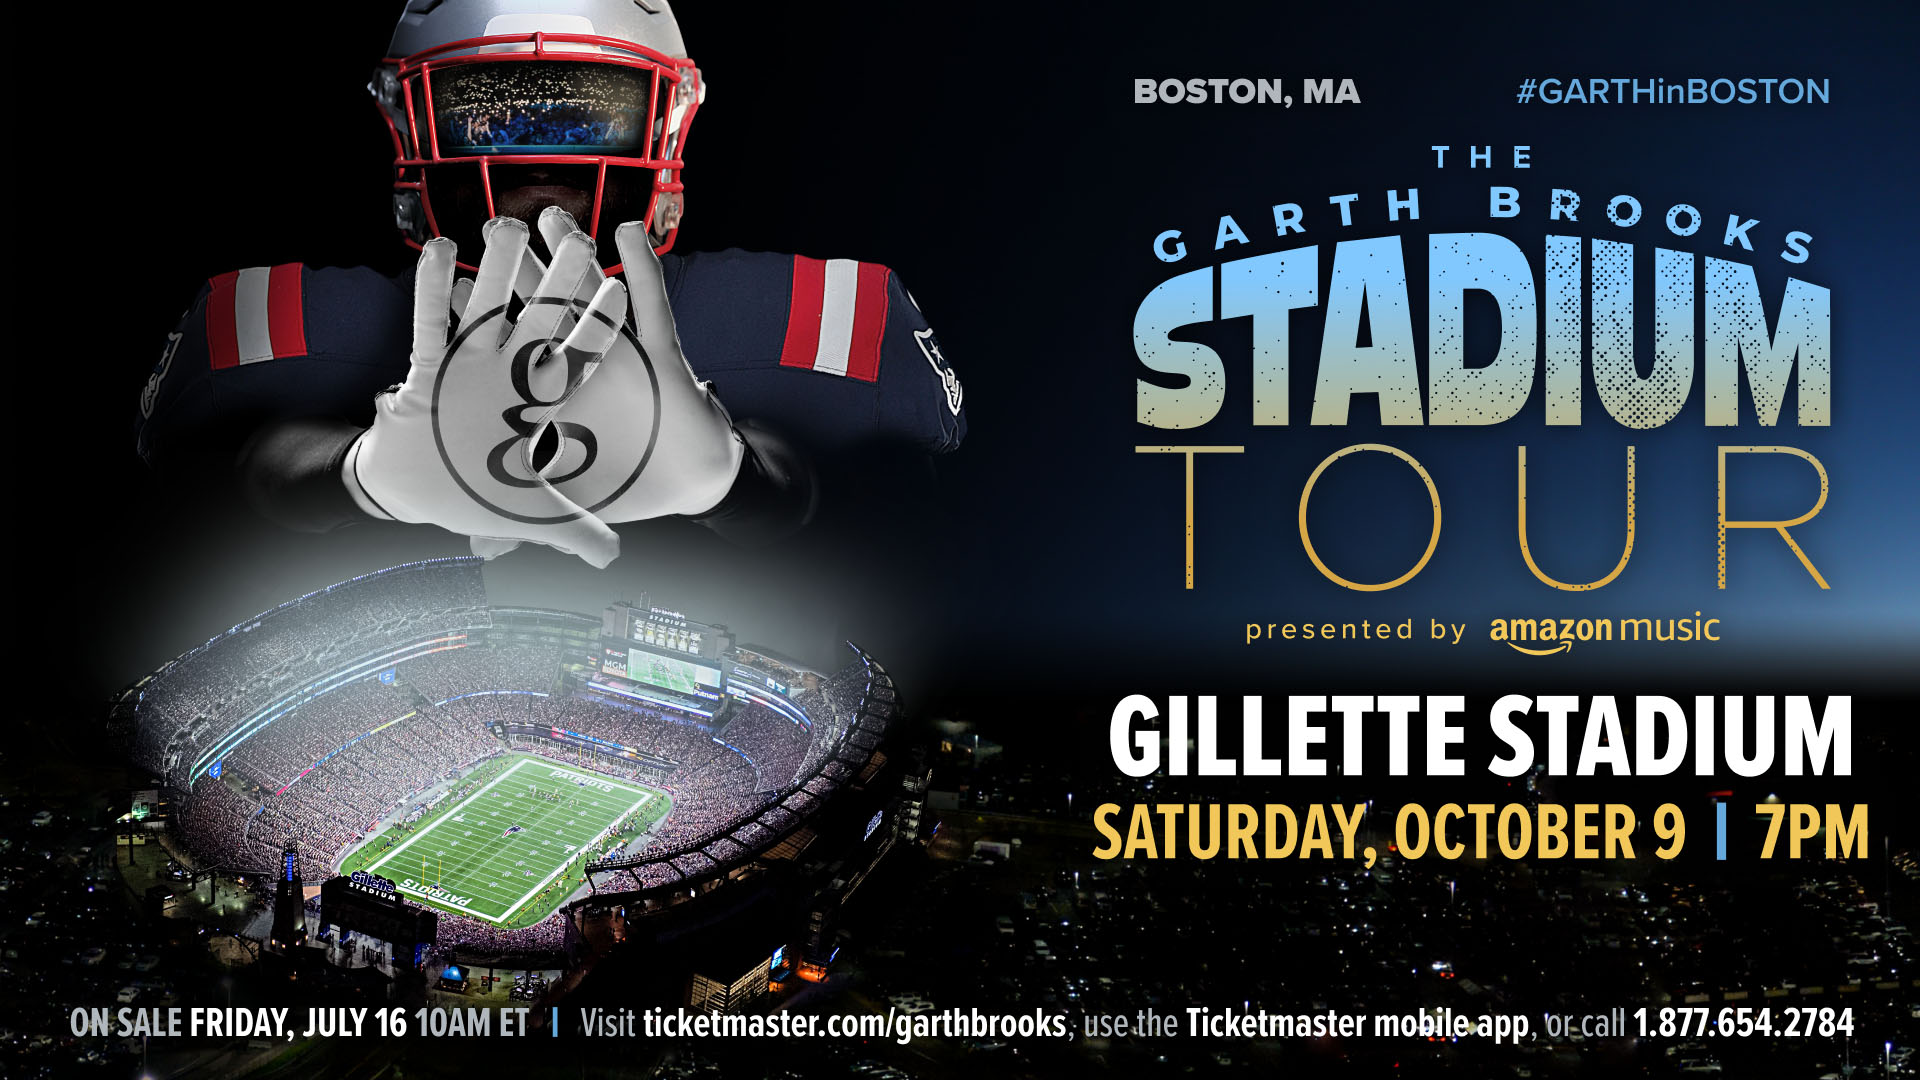 Sign Up For a Chance to Win Tickets to See Garth Brooks at Gillette Stadium